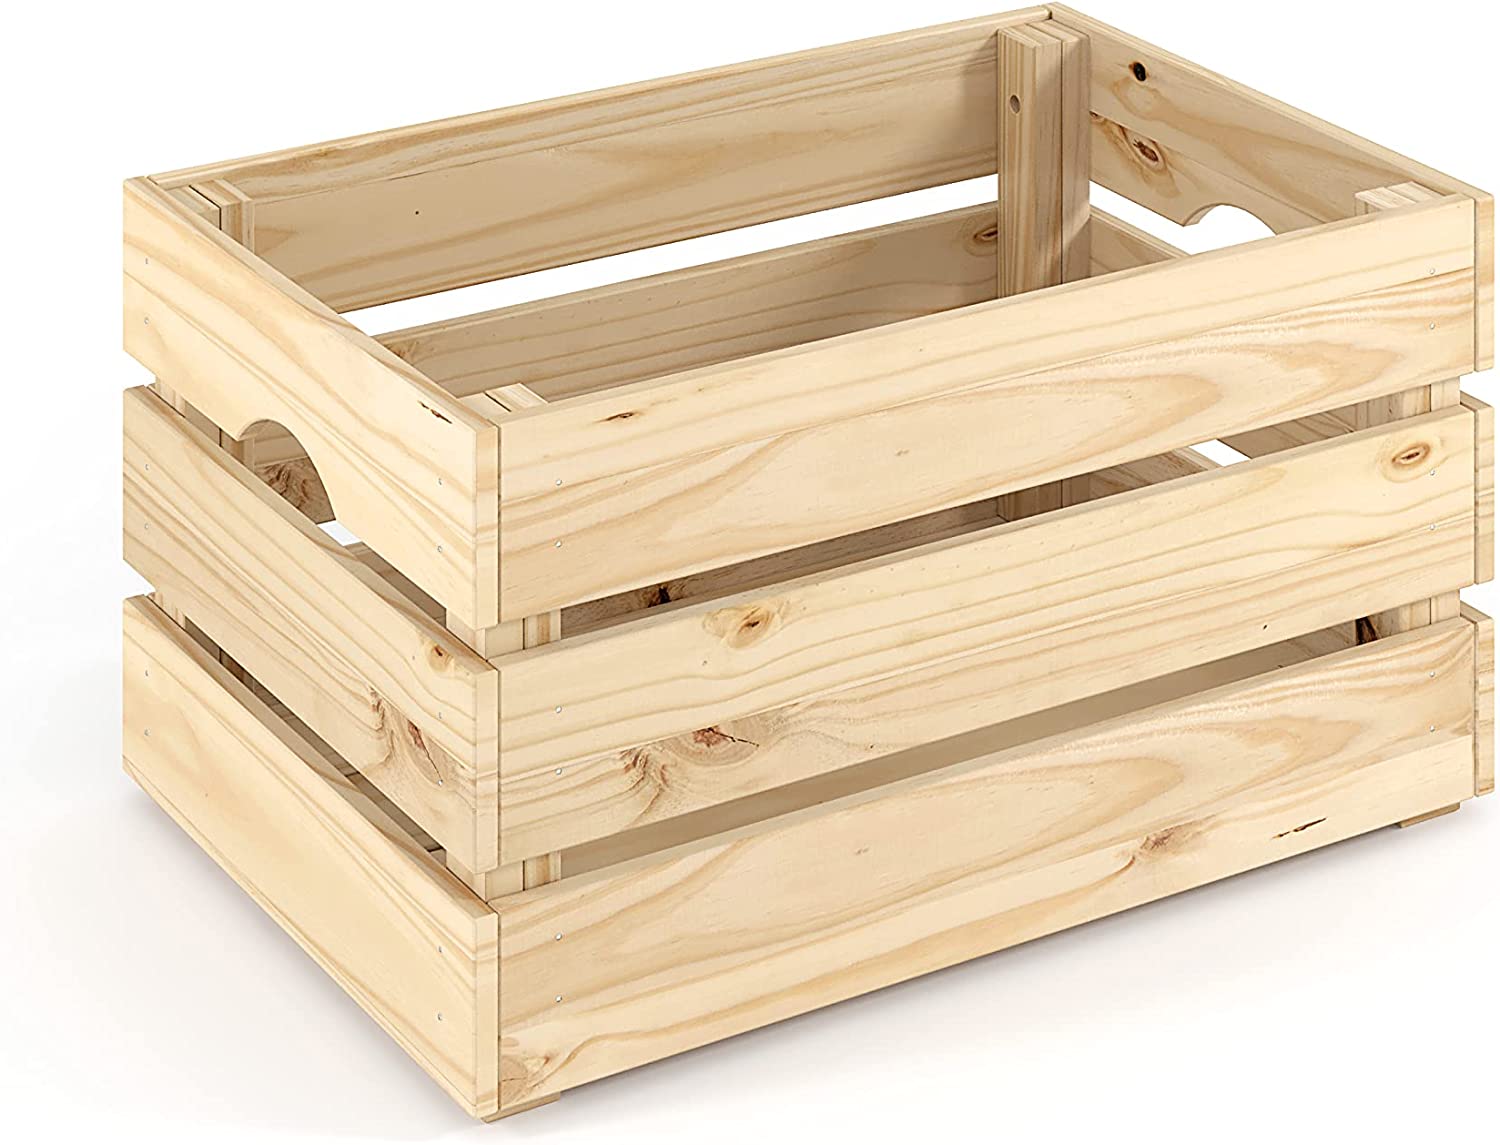 Big Wooden Box Organiser wooden Crate Containers Bin for Storage